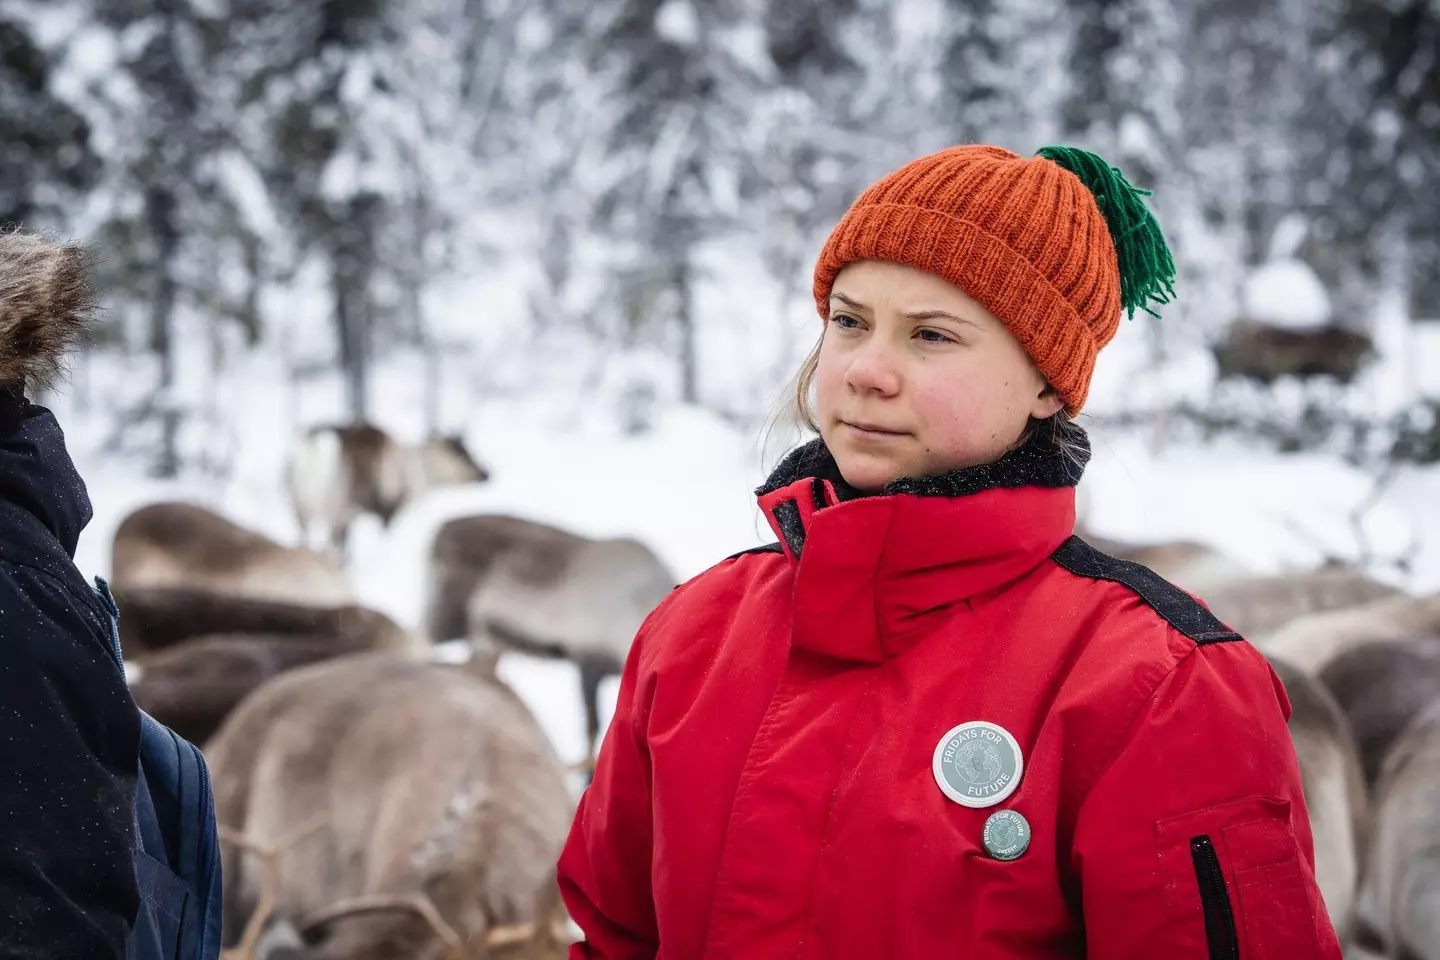 Greta Thunberg was involved in some unlikely beef in with Andrew Tate in recent days.